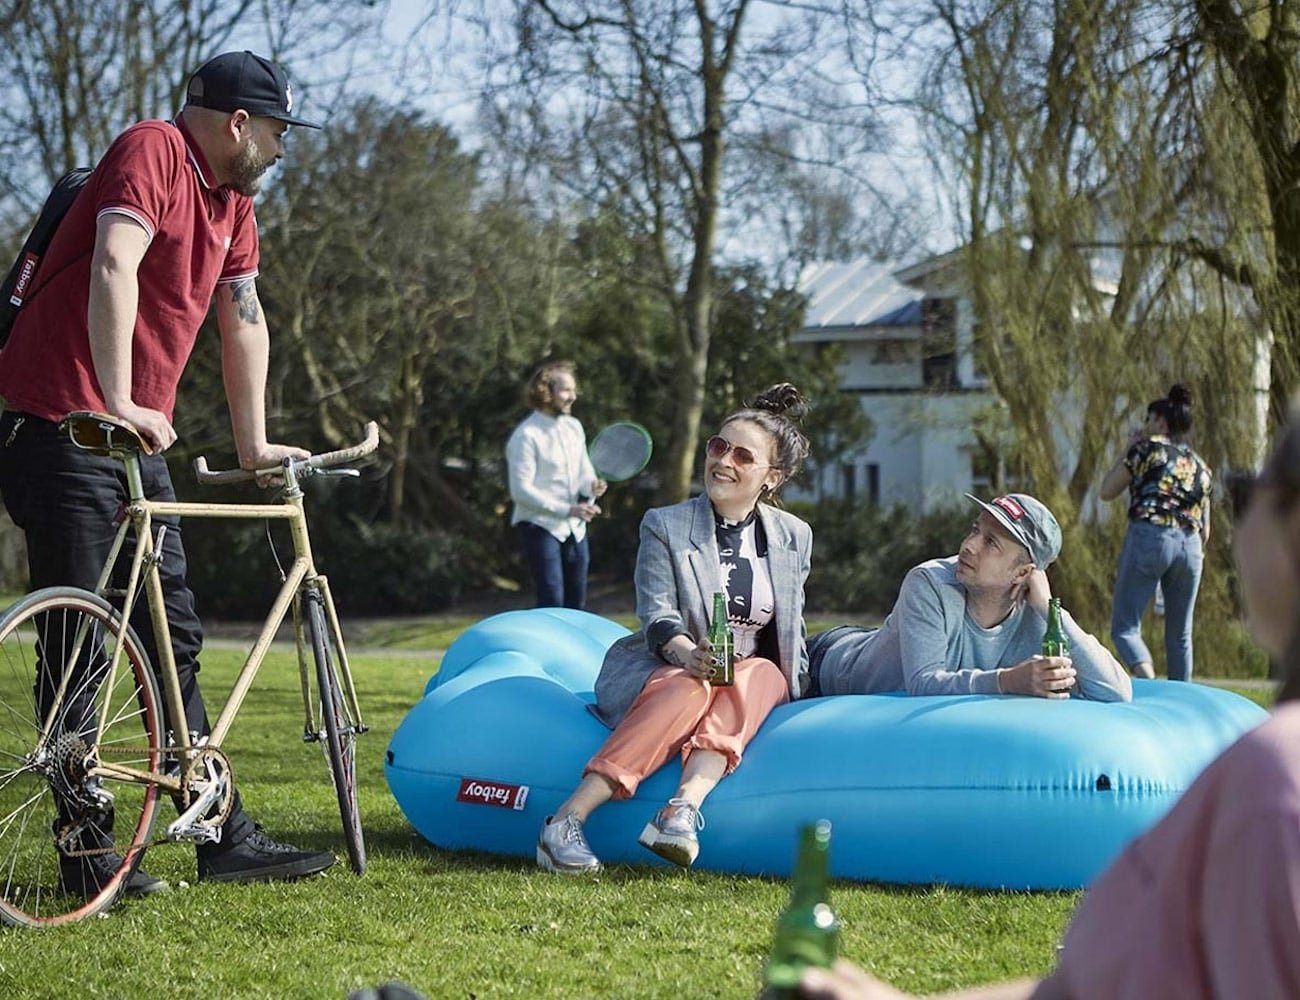 Fatboy Lamzac XXXL Inflatable Lounger inflates in just ten seconds